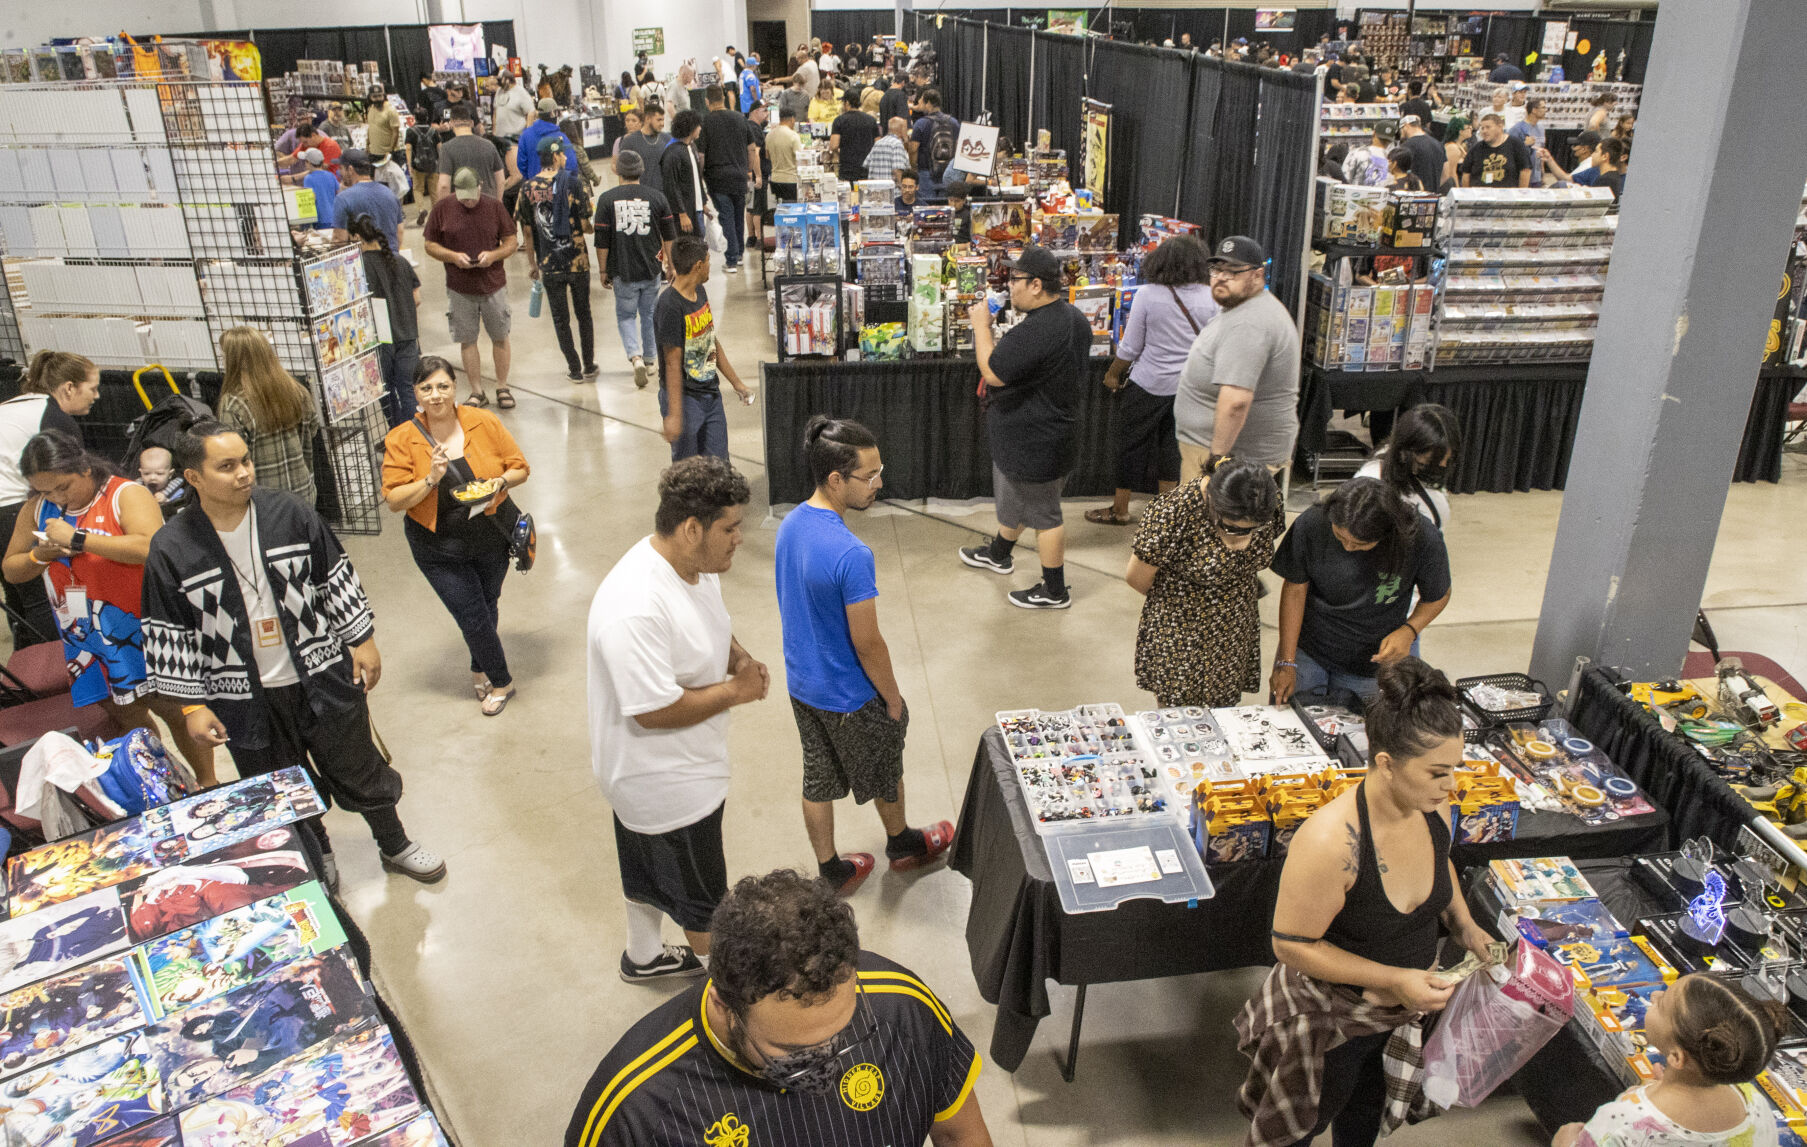 Bakersfield Collector-Con brings out the fan in everyone